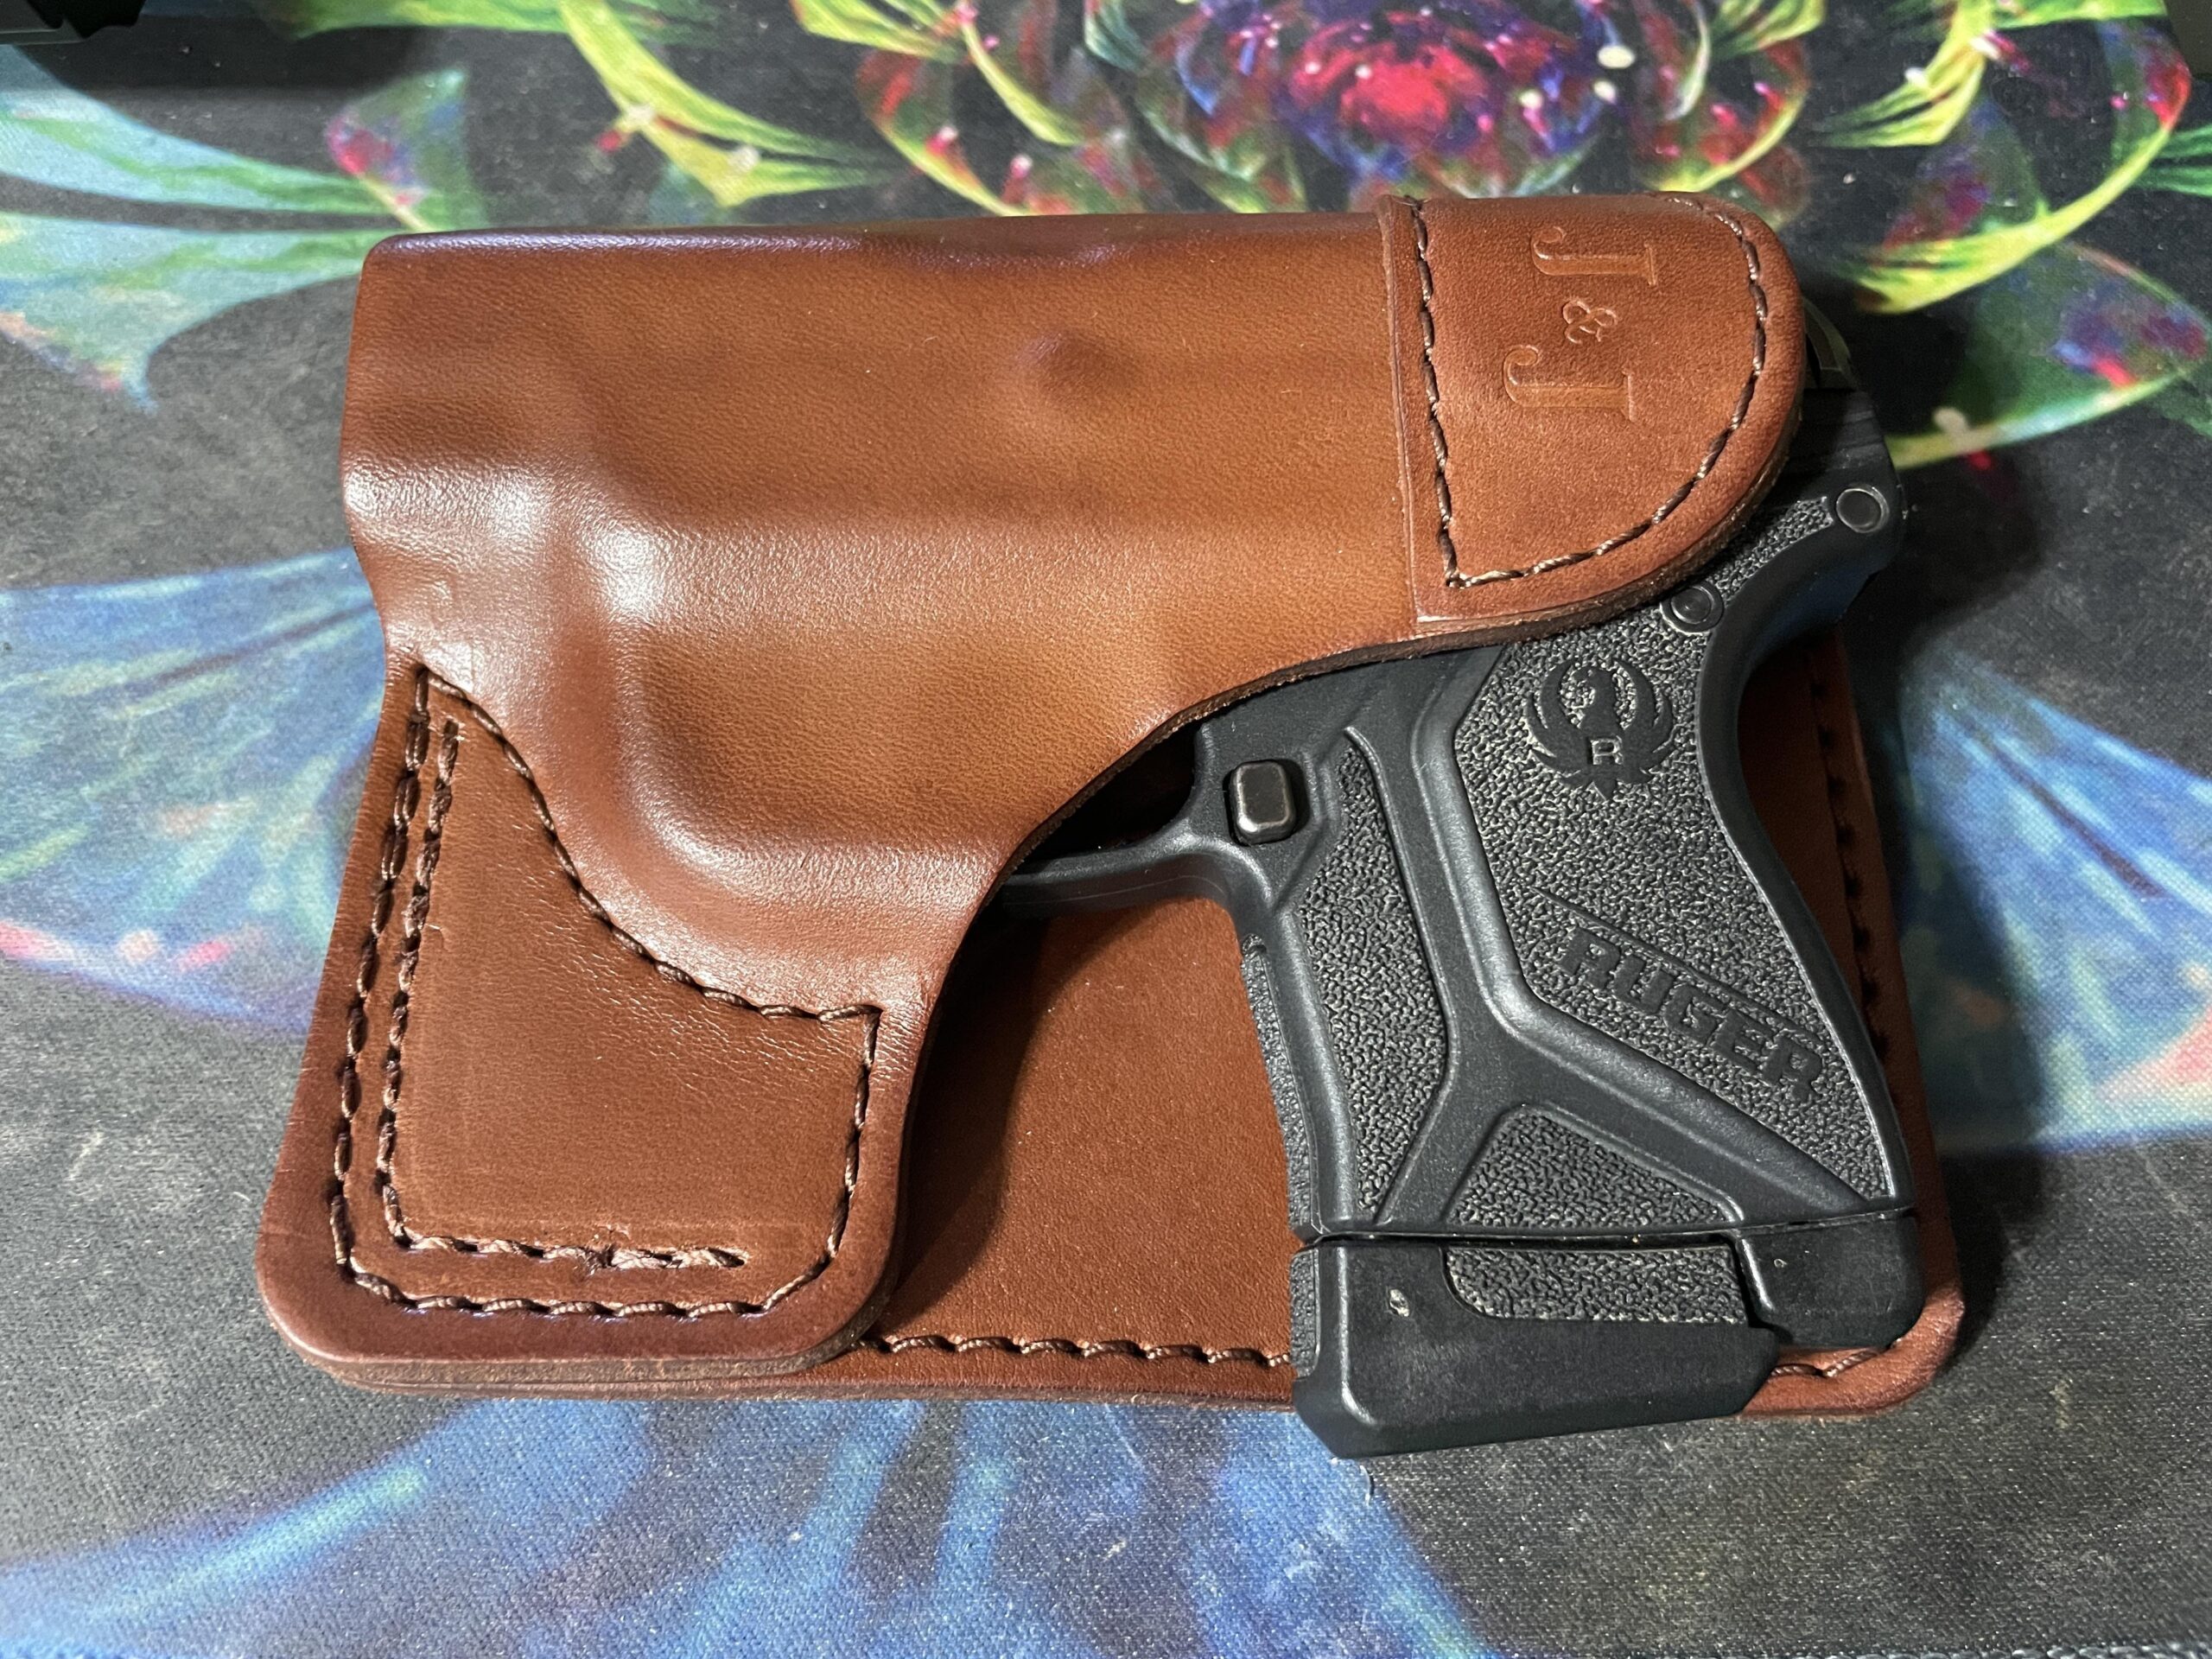 The Ultimate Guide to Finding the Right Desantis Holster for Your Firearm